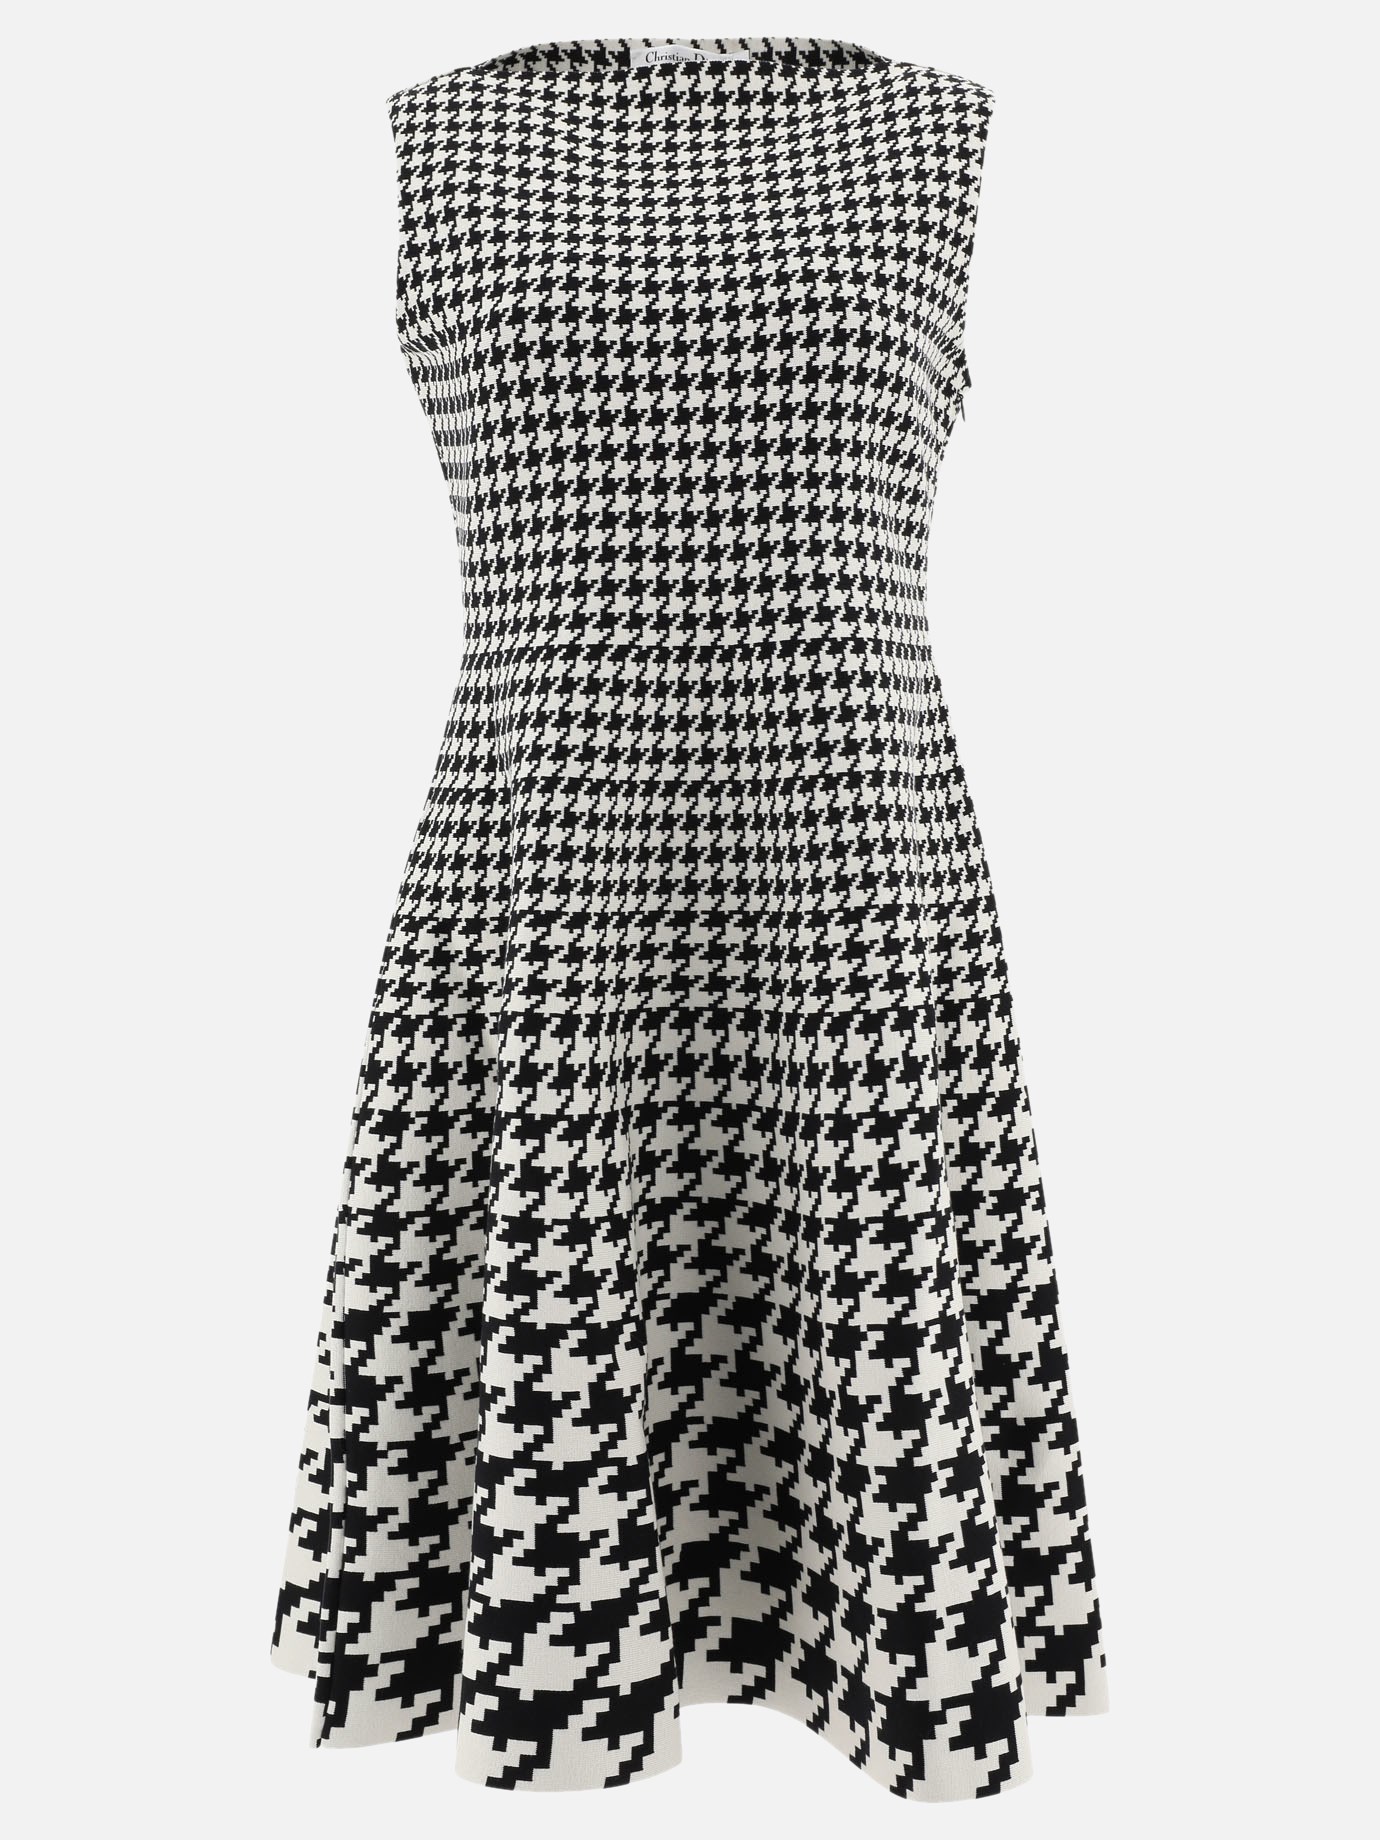 Flared houndstooth dress by Dior